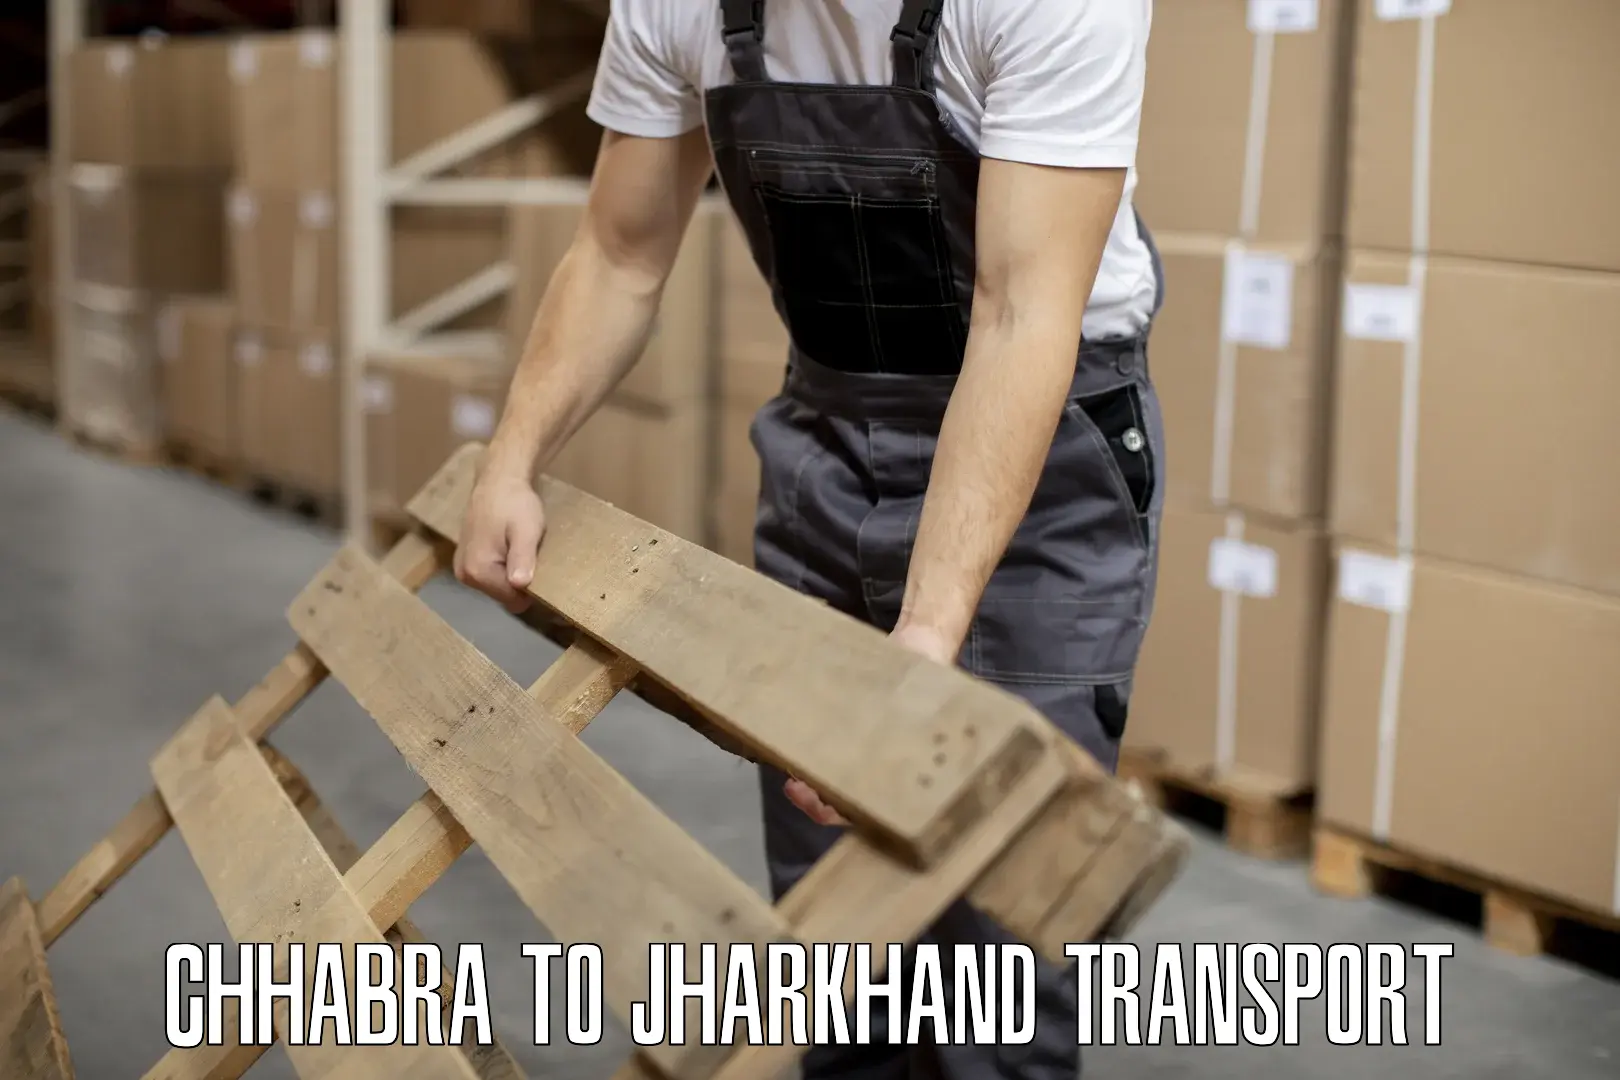 Air freight transport services Chhabra to Poreyahat